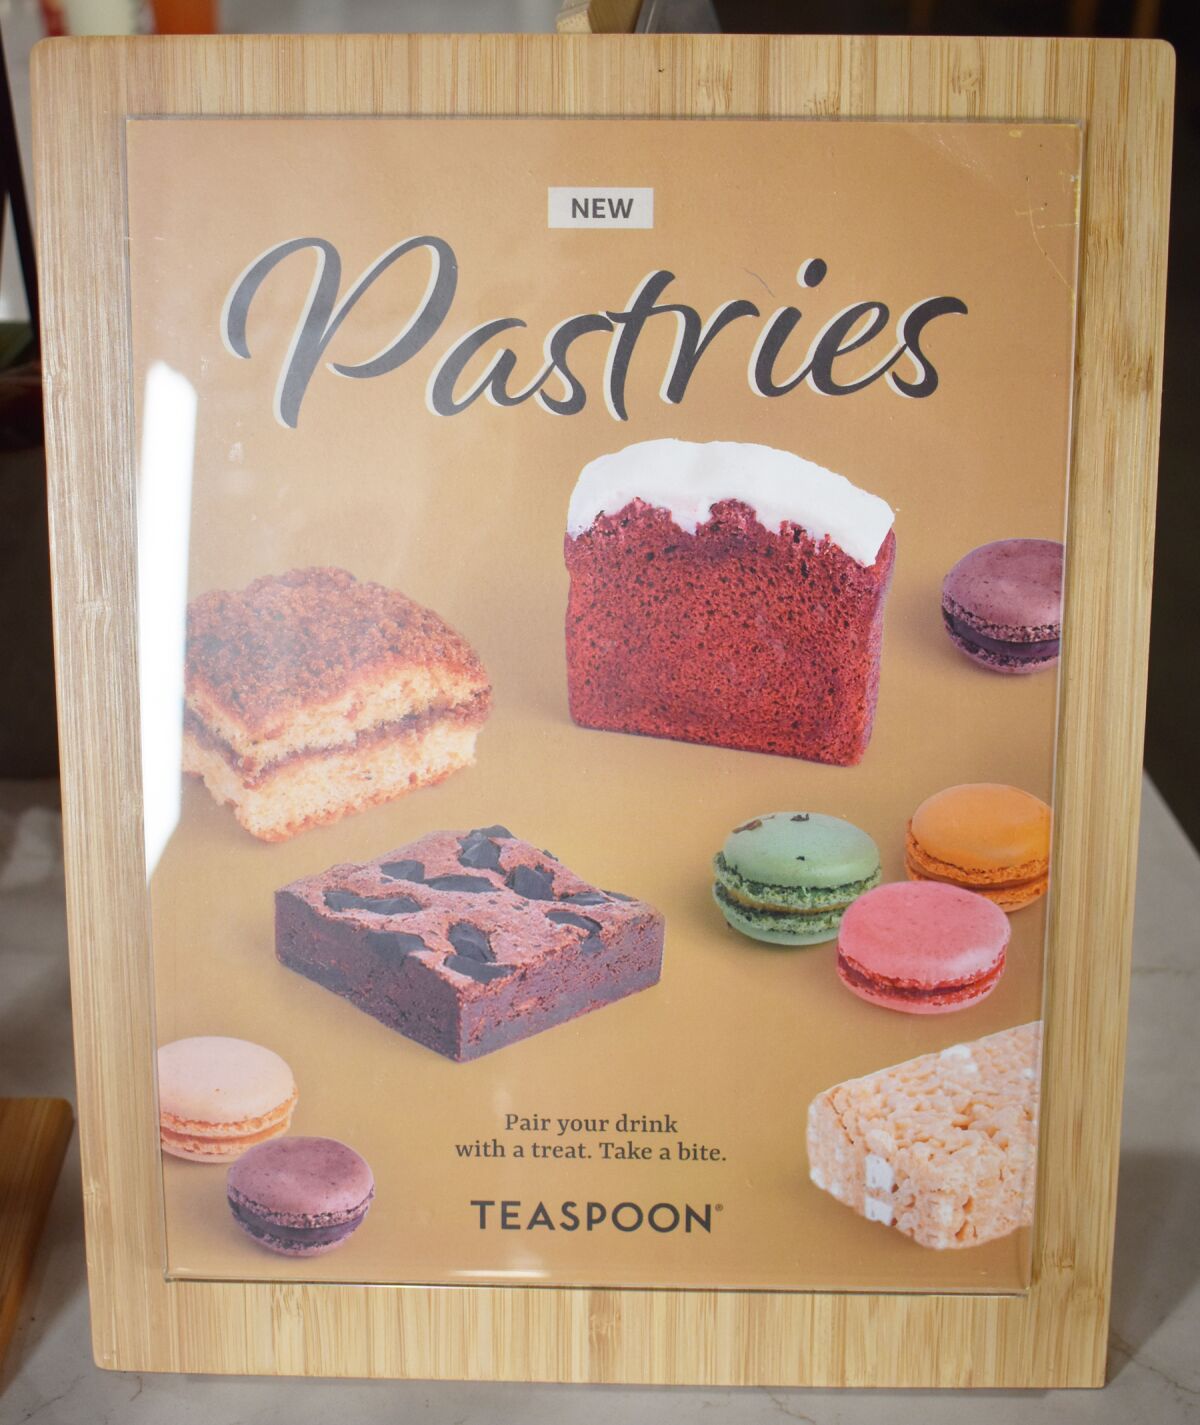 An assortment of pastries, including coffee cake, brownies and macarons are also available at Teaspoon 4S Ranch.